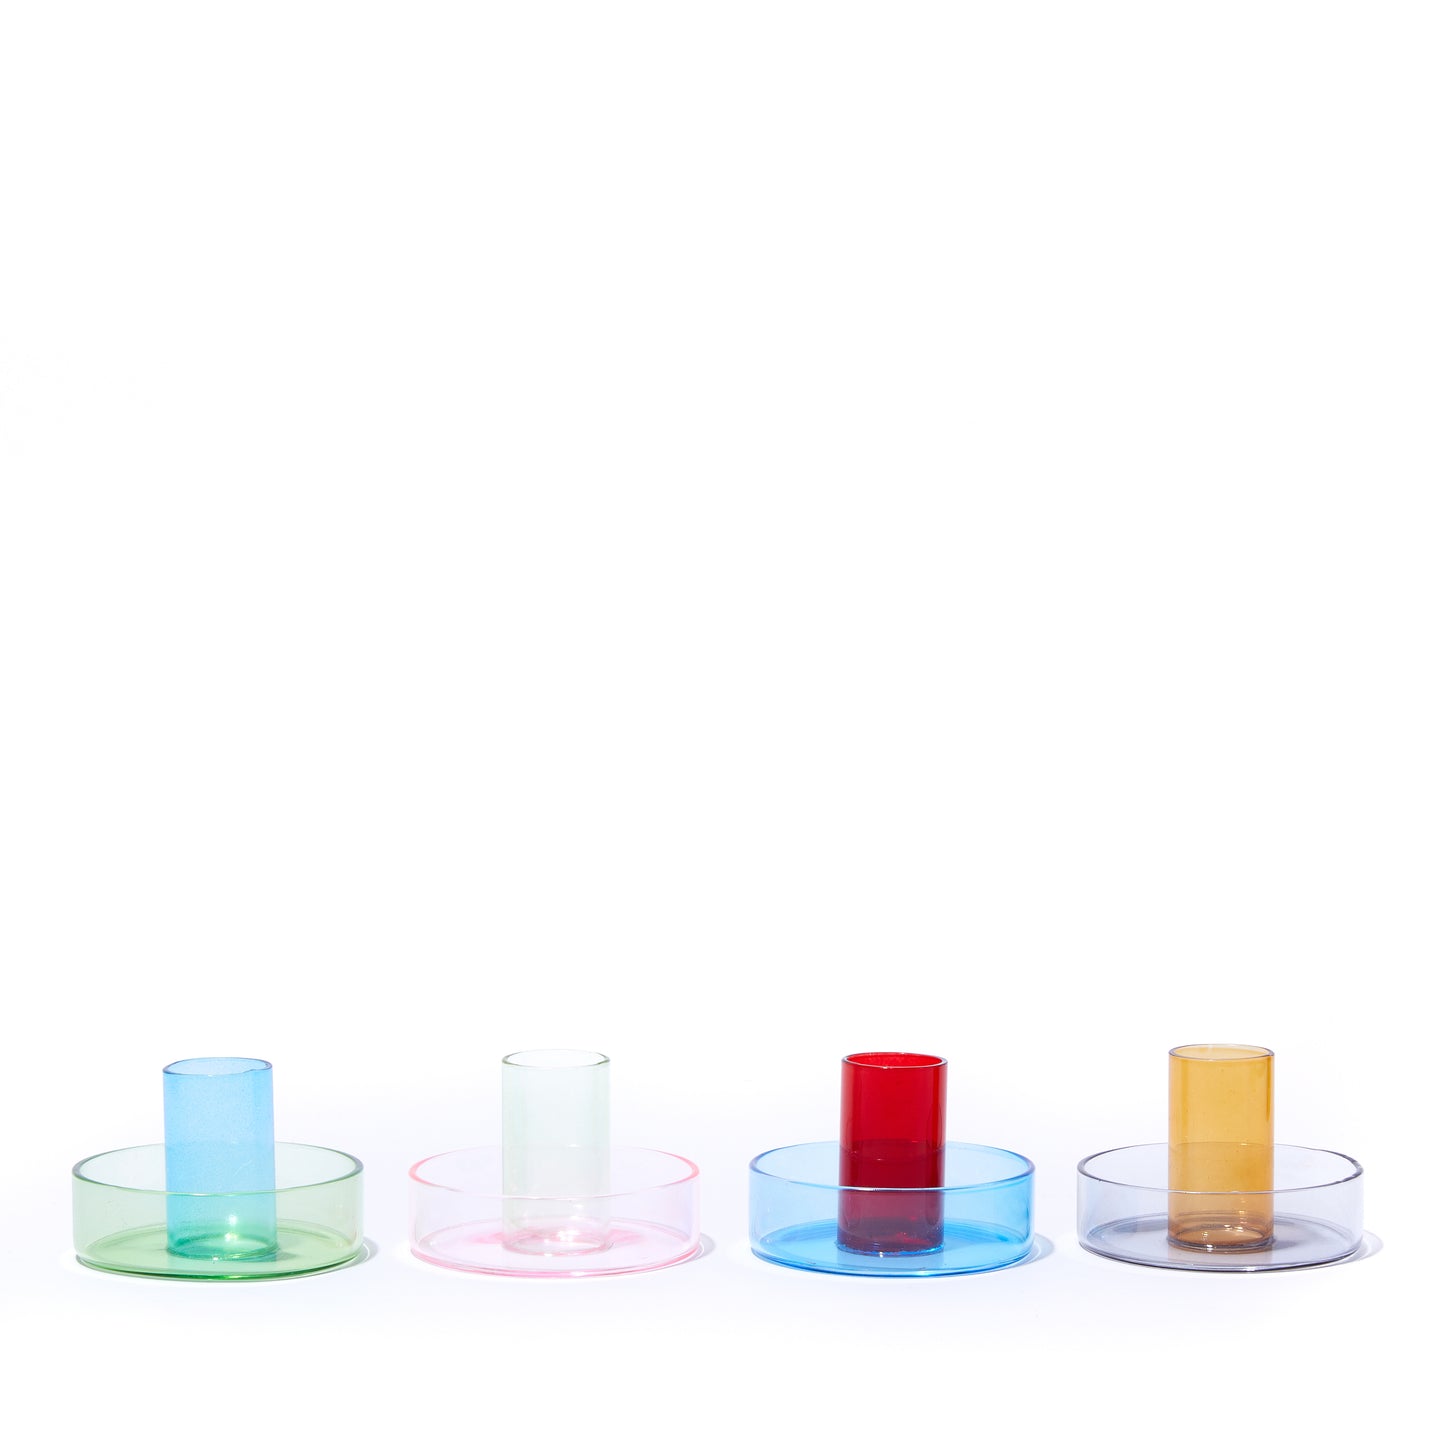 DUO TONE GLASS CANDLESTICK | PINK & GREEN